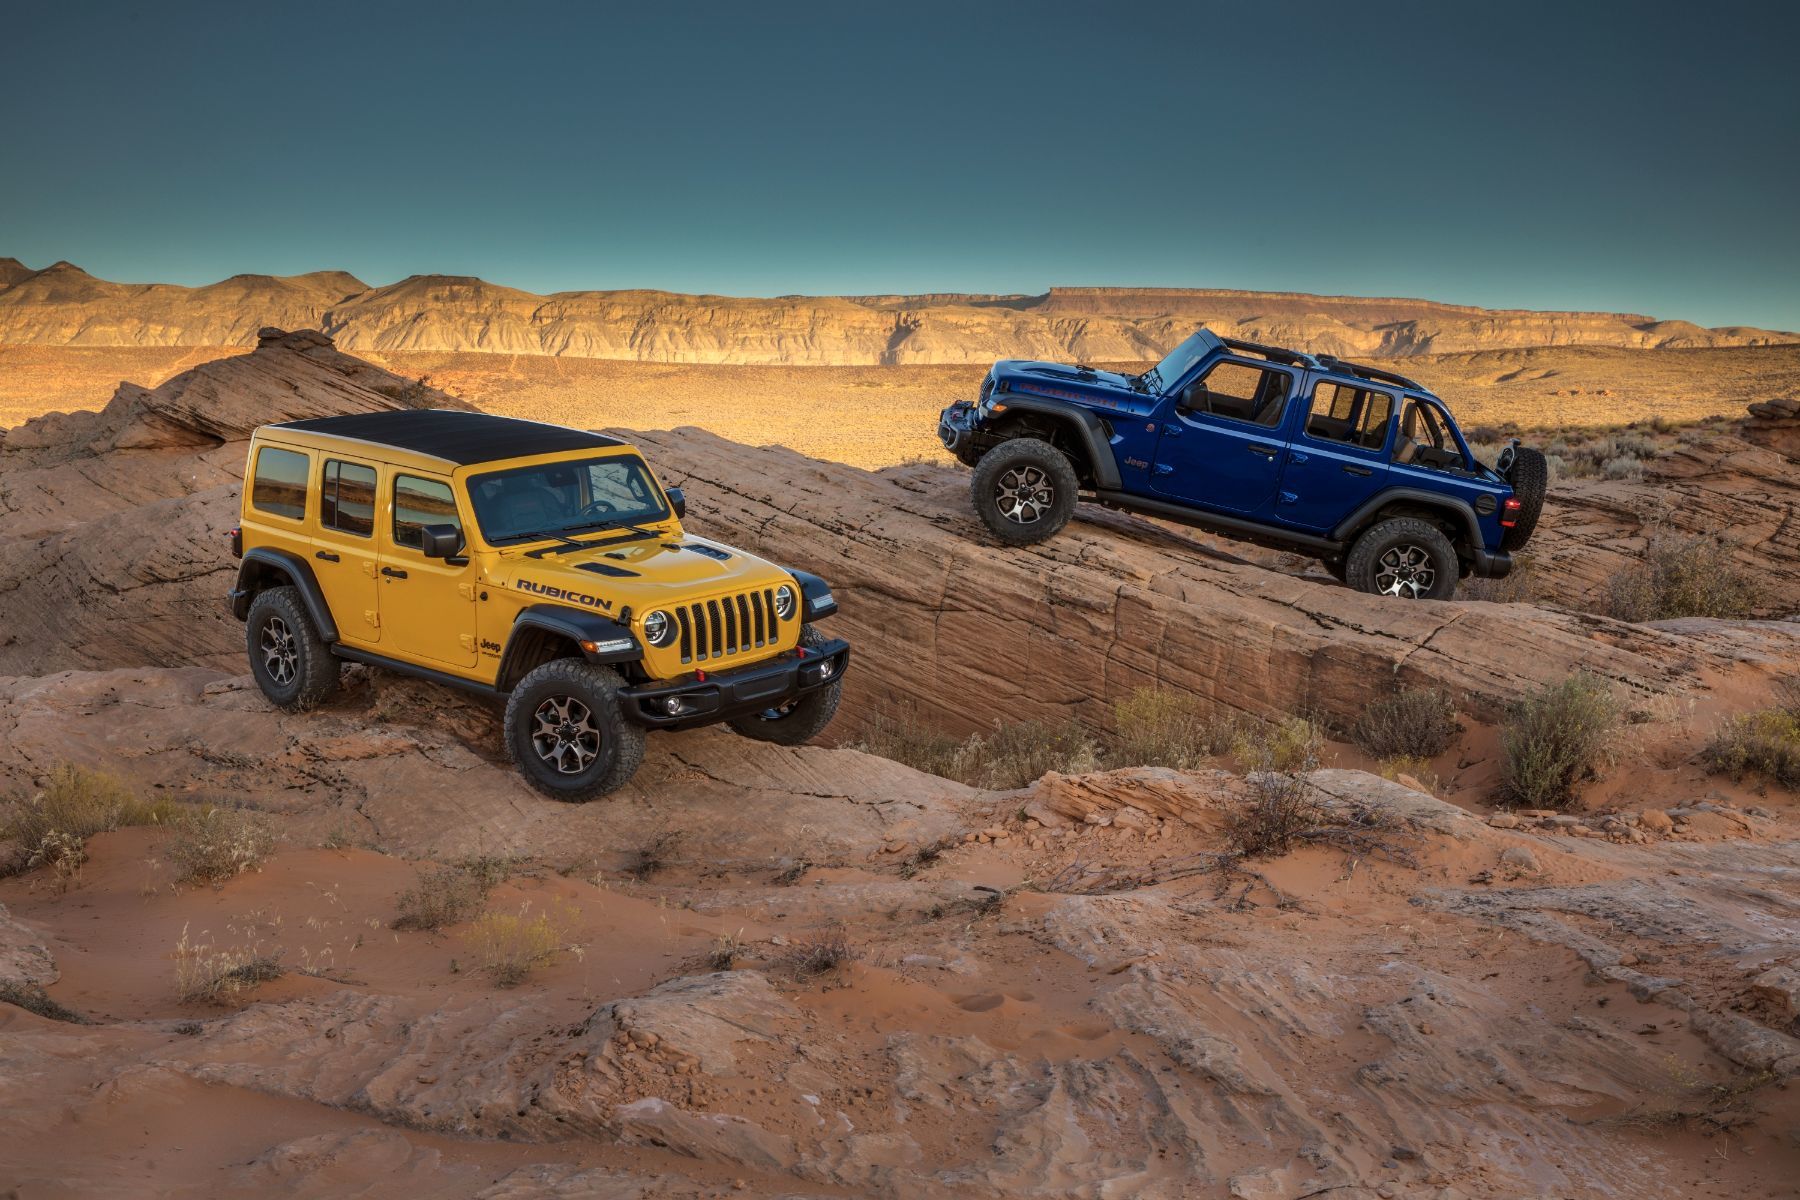 2021 Jeep Wrangler: The King of Off-Road